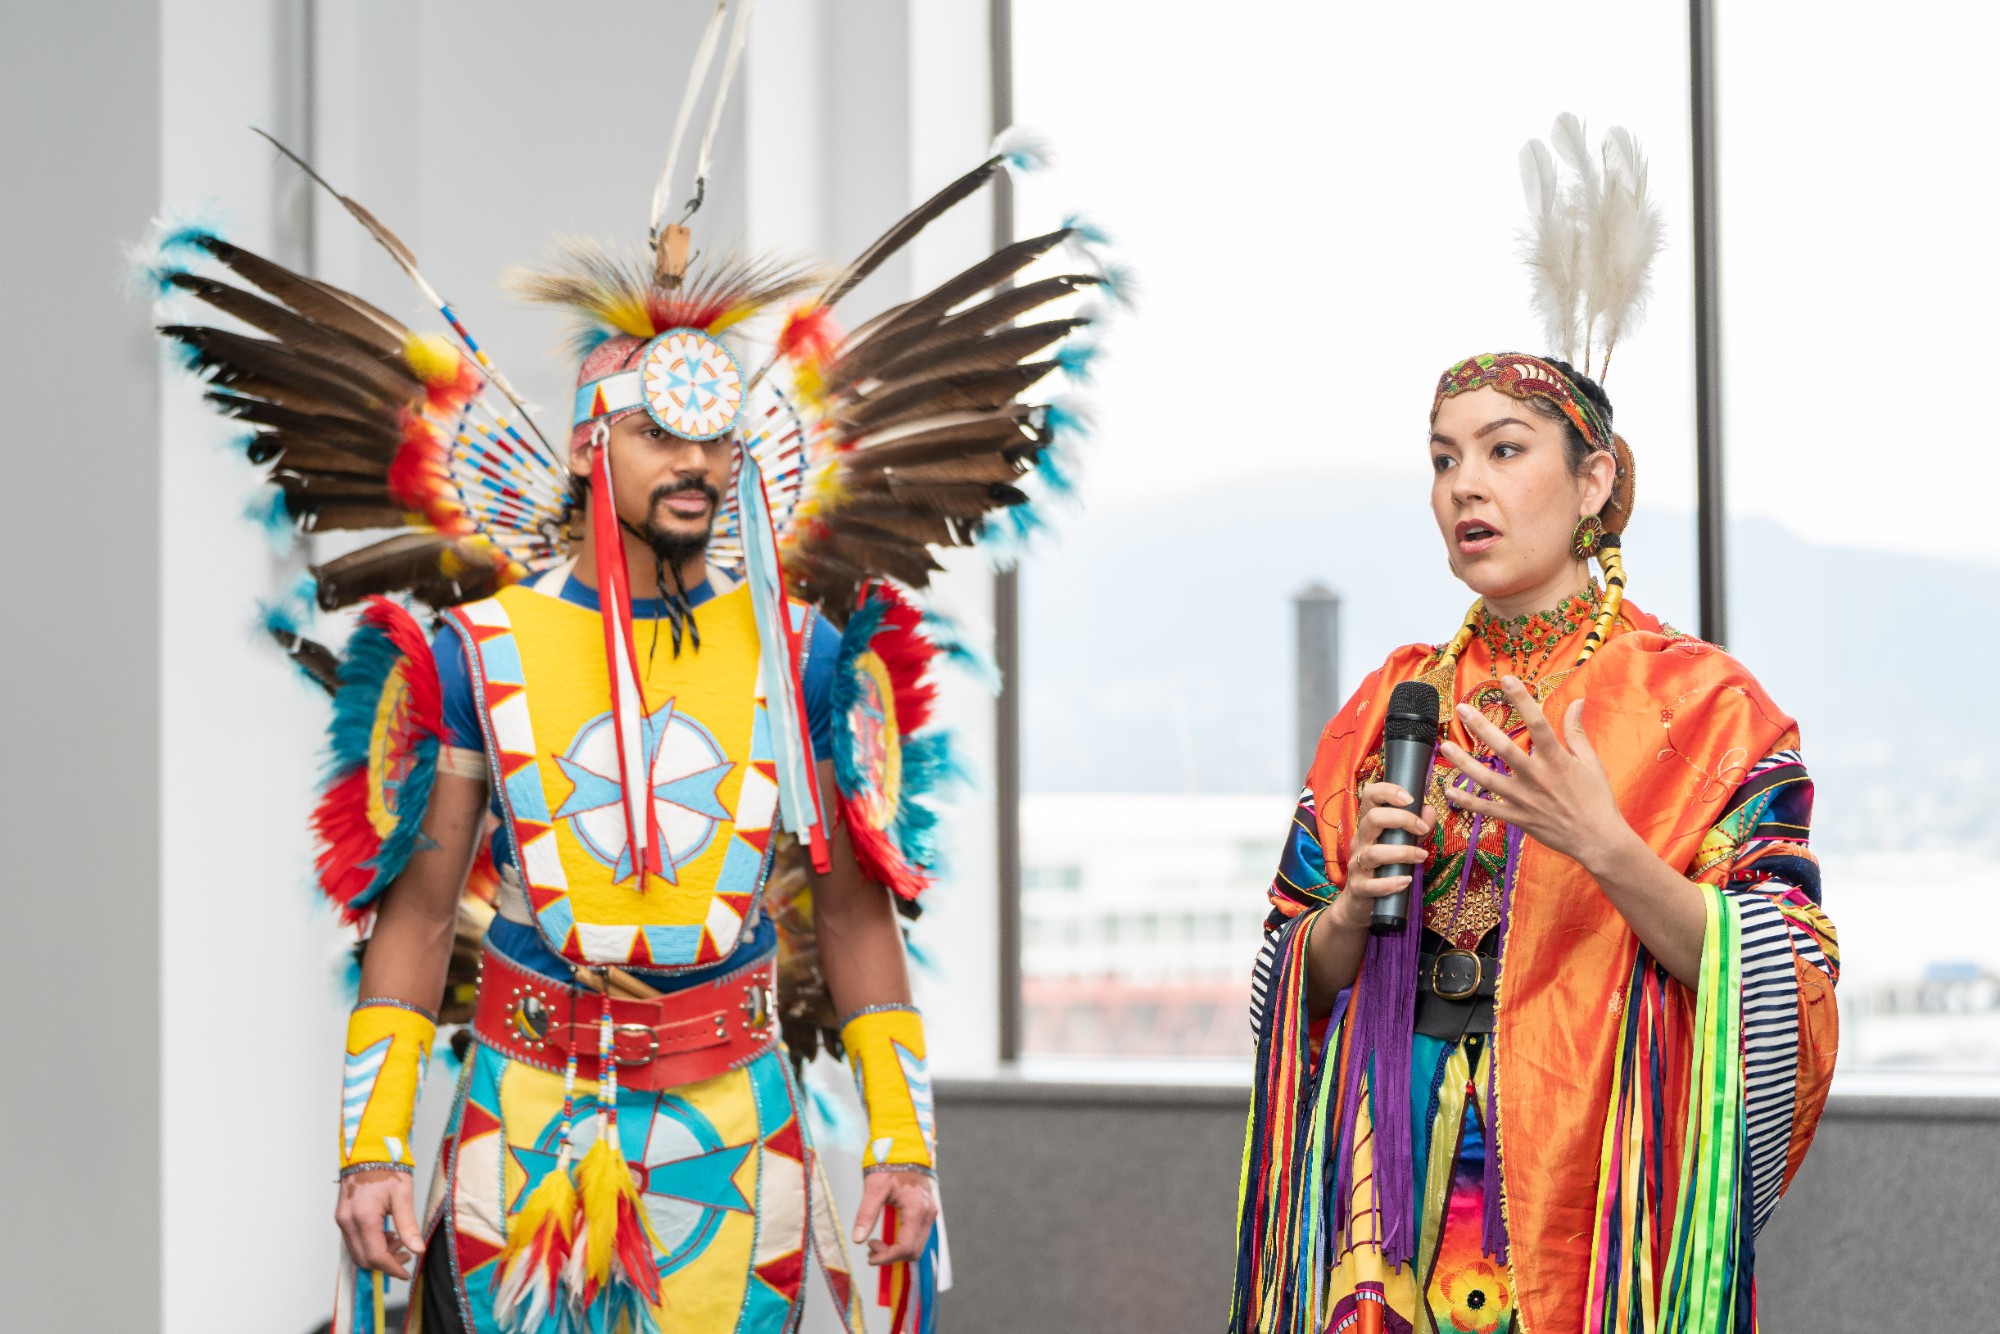 SFU showcased Indigenous artists through a special series of ArtsLive performances. Pictured here, Wild Moccasin Dancers Shyama-Priya, Cree and David Whitebean, Mohawk